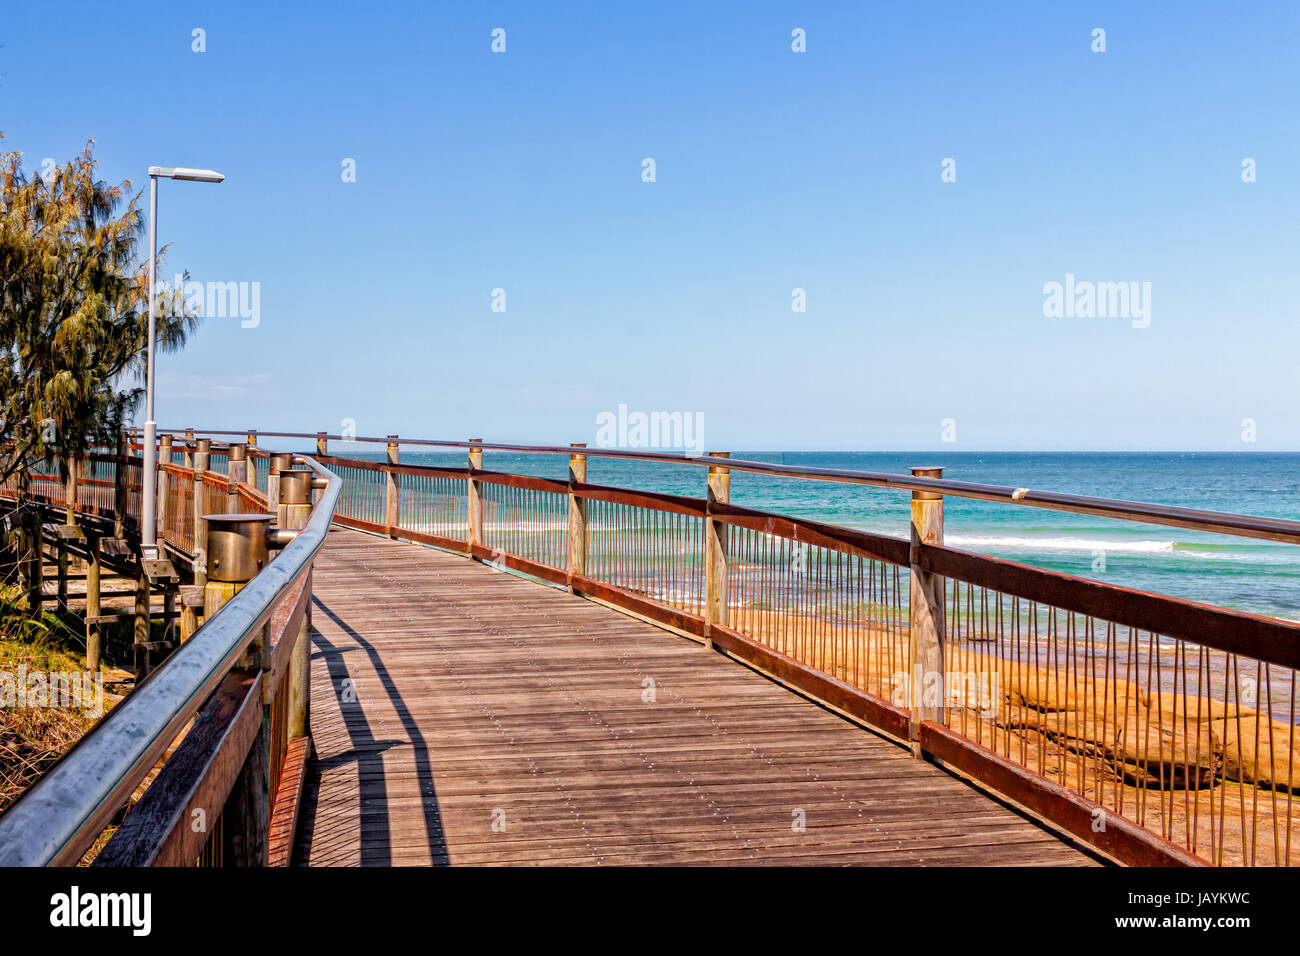 The boardwalk connects the beaches at Caloundra, Queensland, Australia. People use the boardwalk for walks, jogging, cycling and just hanging around. Stock Photo